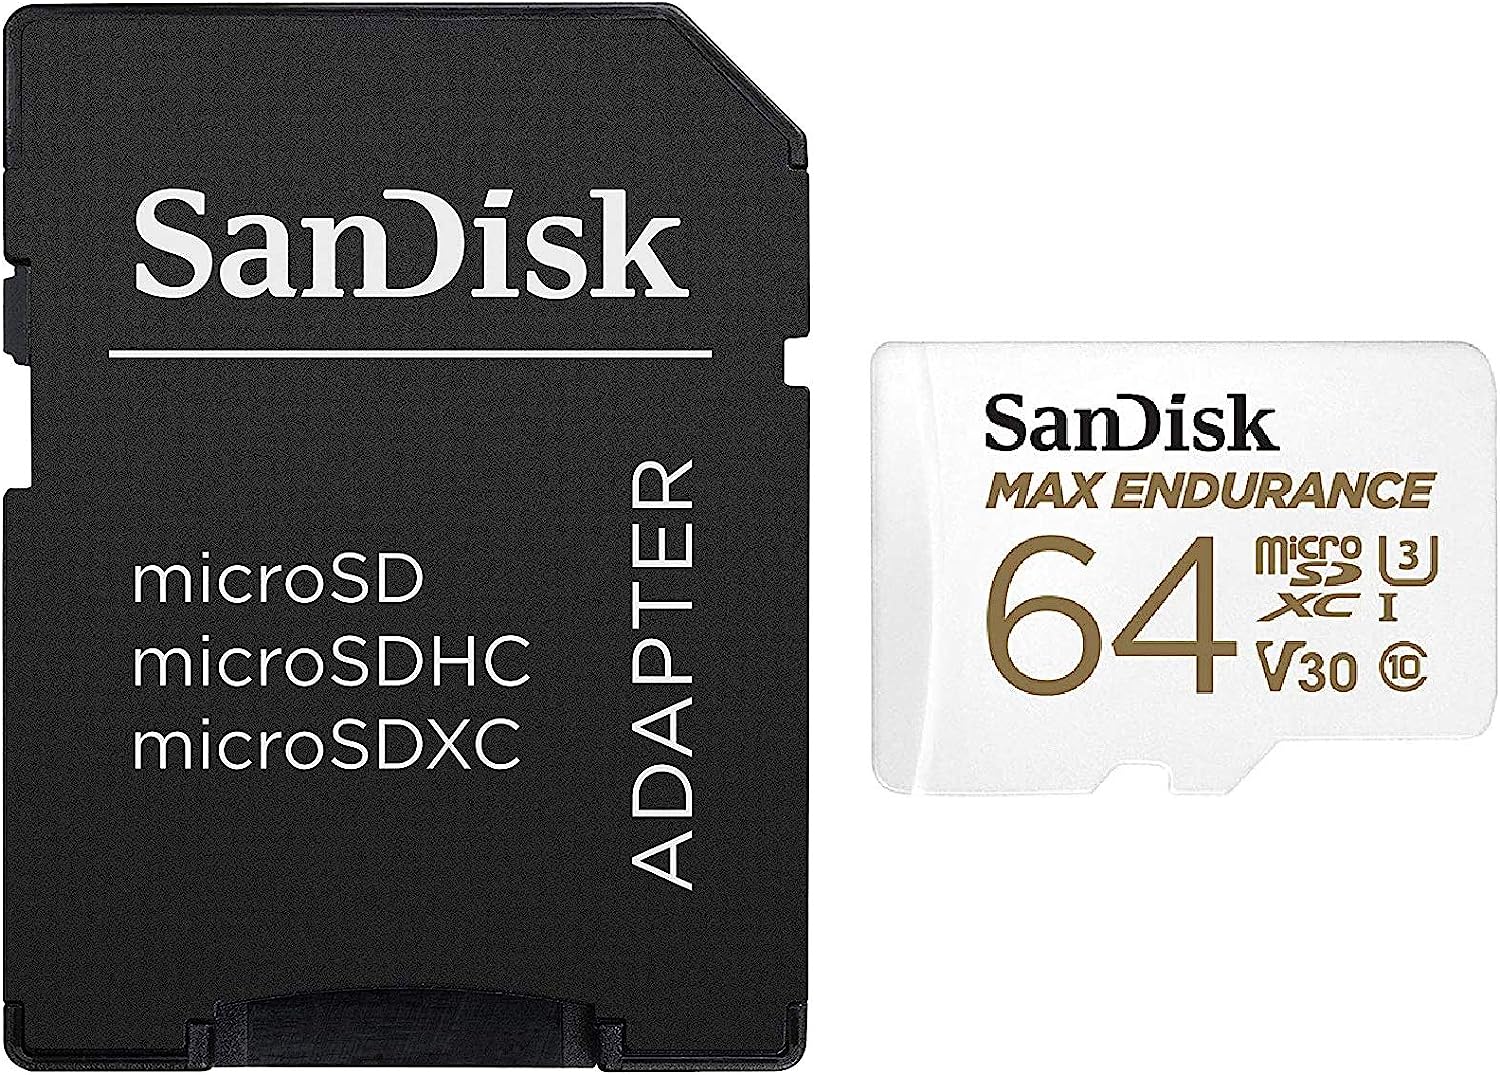 SanDisk Max Endurance MicroSD Card with Adapter, 64GB, White - SDSQQVR-064G-GN6IA